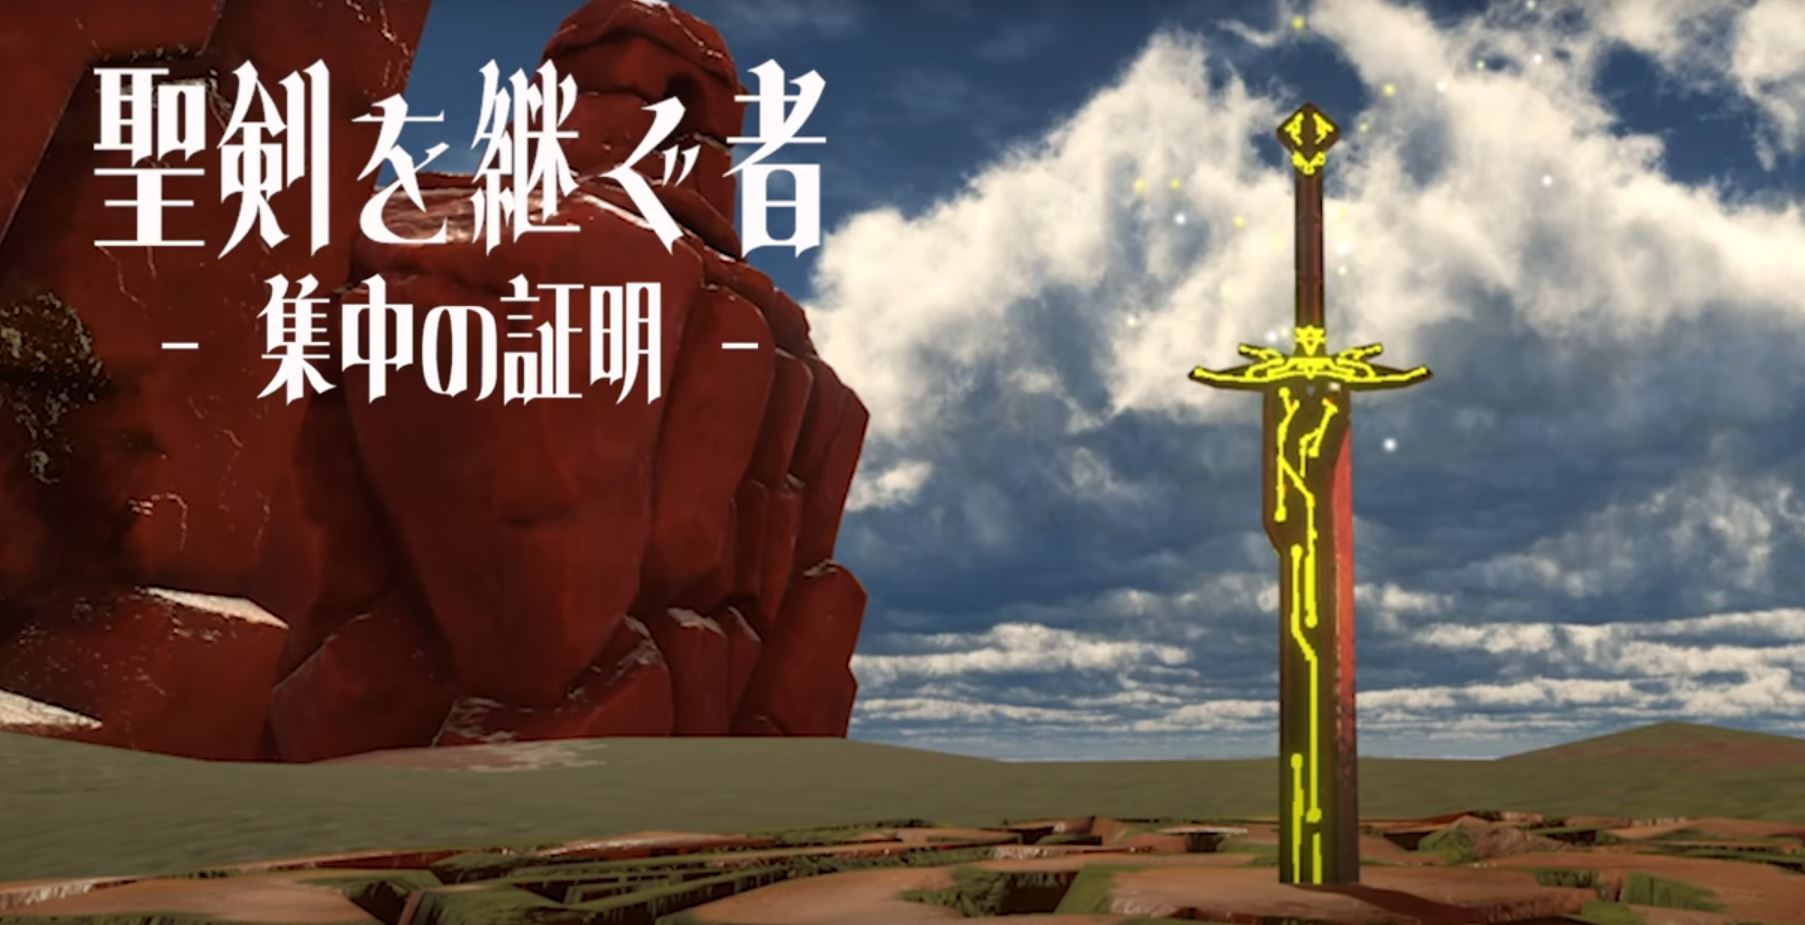 What if the Master Sword took concentration to pull out rather than toughness? Japanese scientists recreate the idea in VR 